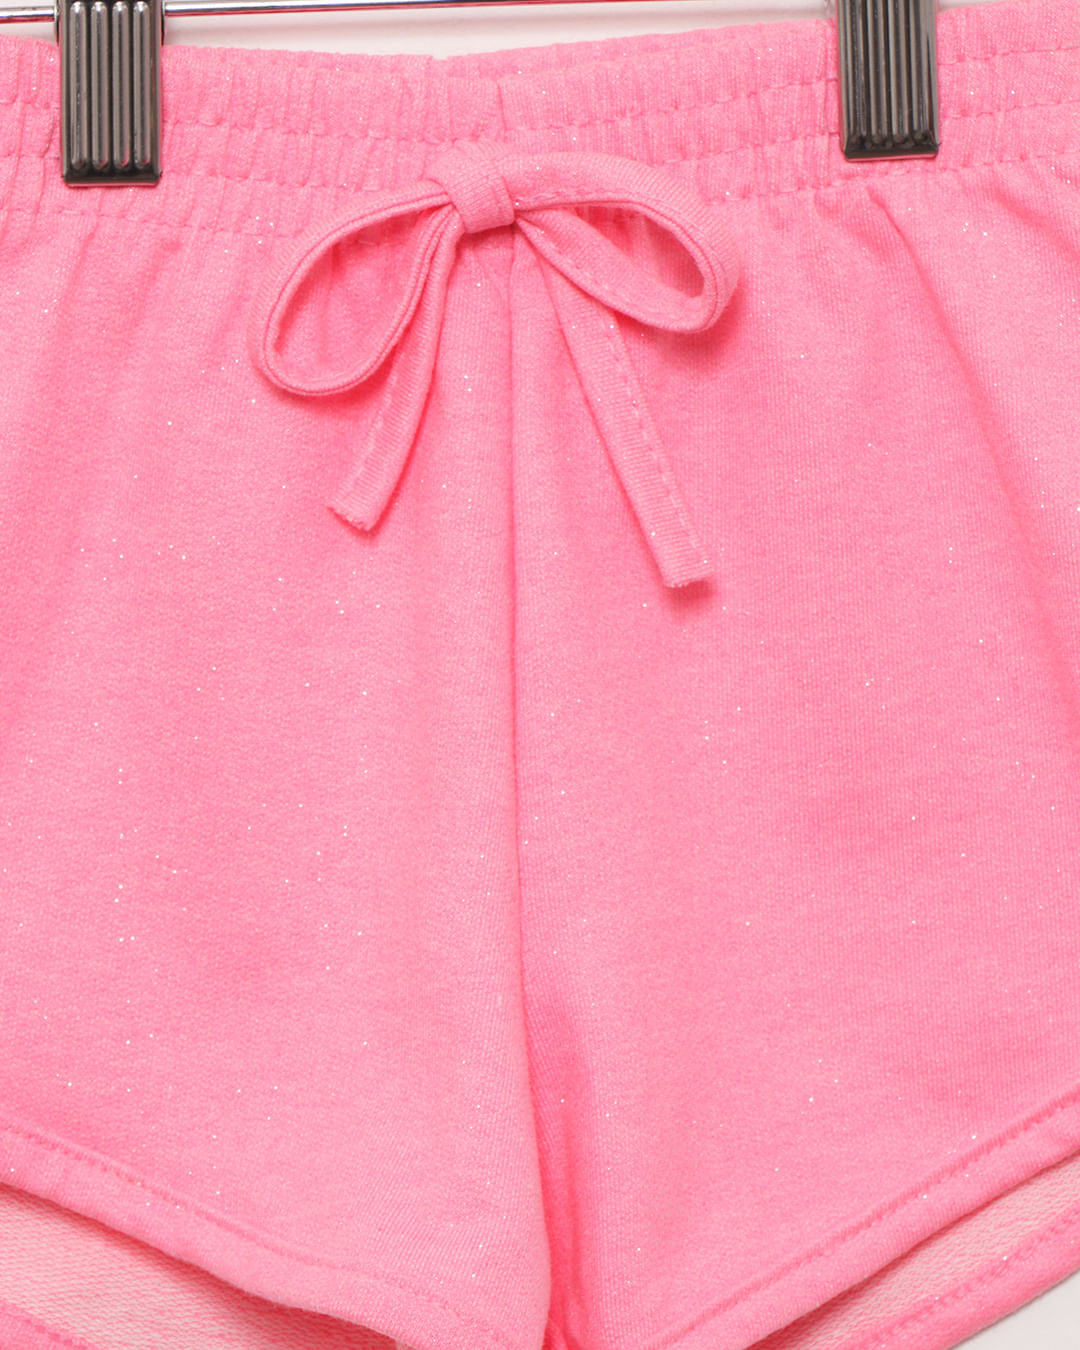 Shorts-Glit-Coord-Neon-To-35888-Fem-13---Rosa-Neon